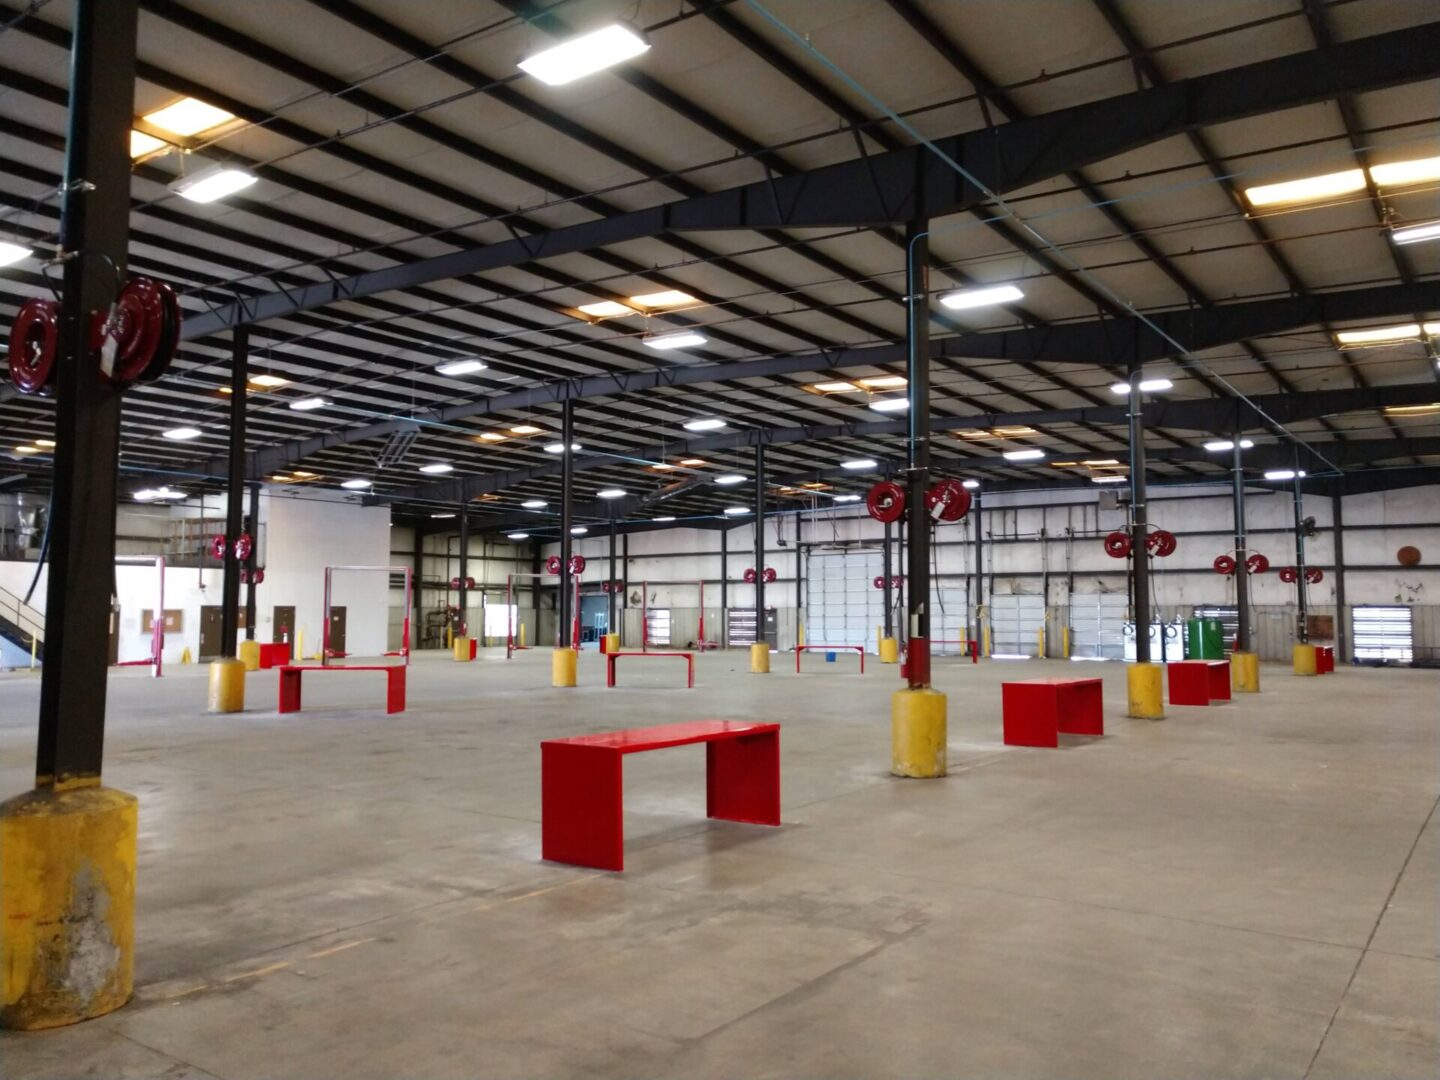 A large warehouse with many red and yellow benches.